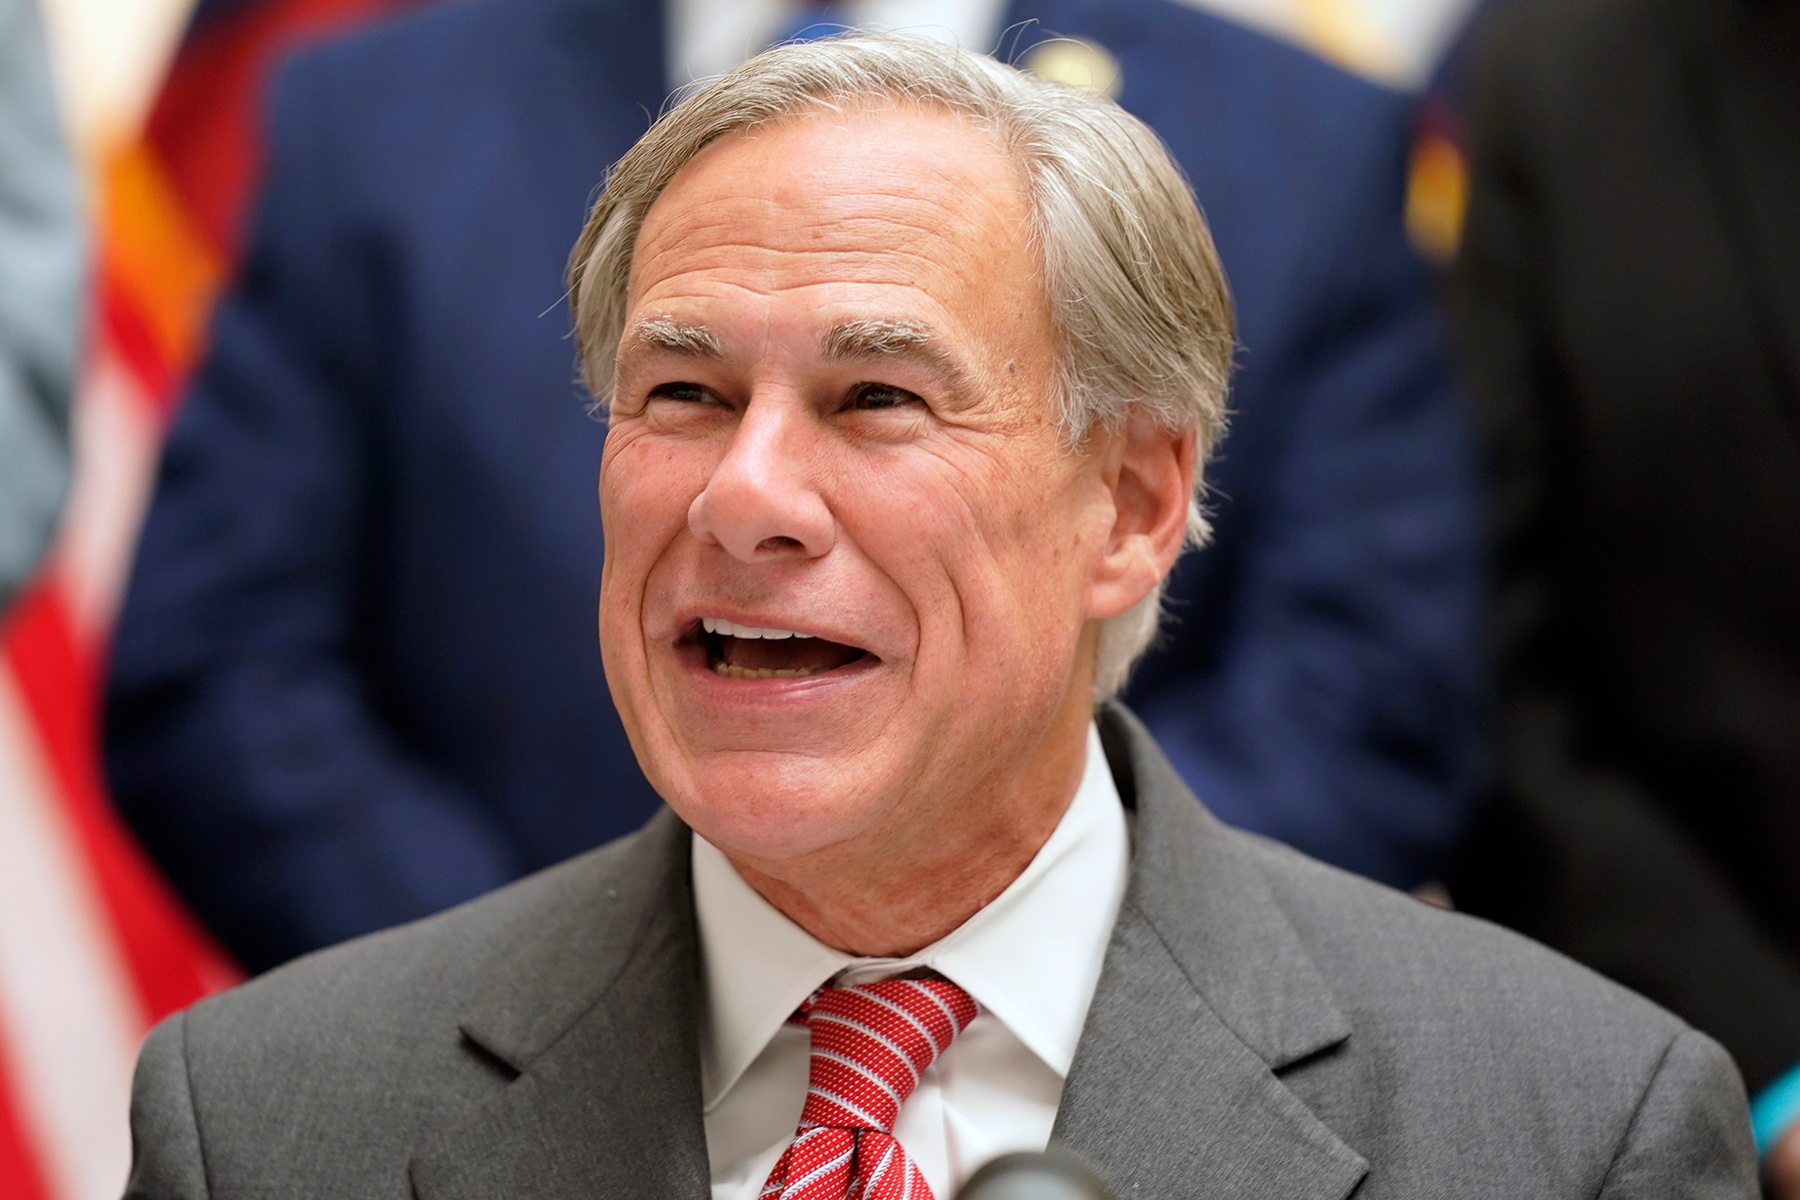 Texas Gov. Greg Abbott Signs New Law Restricting Use of Abortion-Inducing Drugs